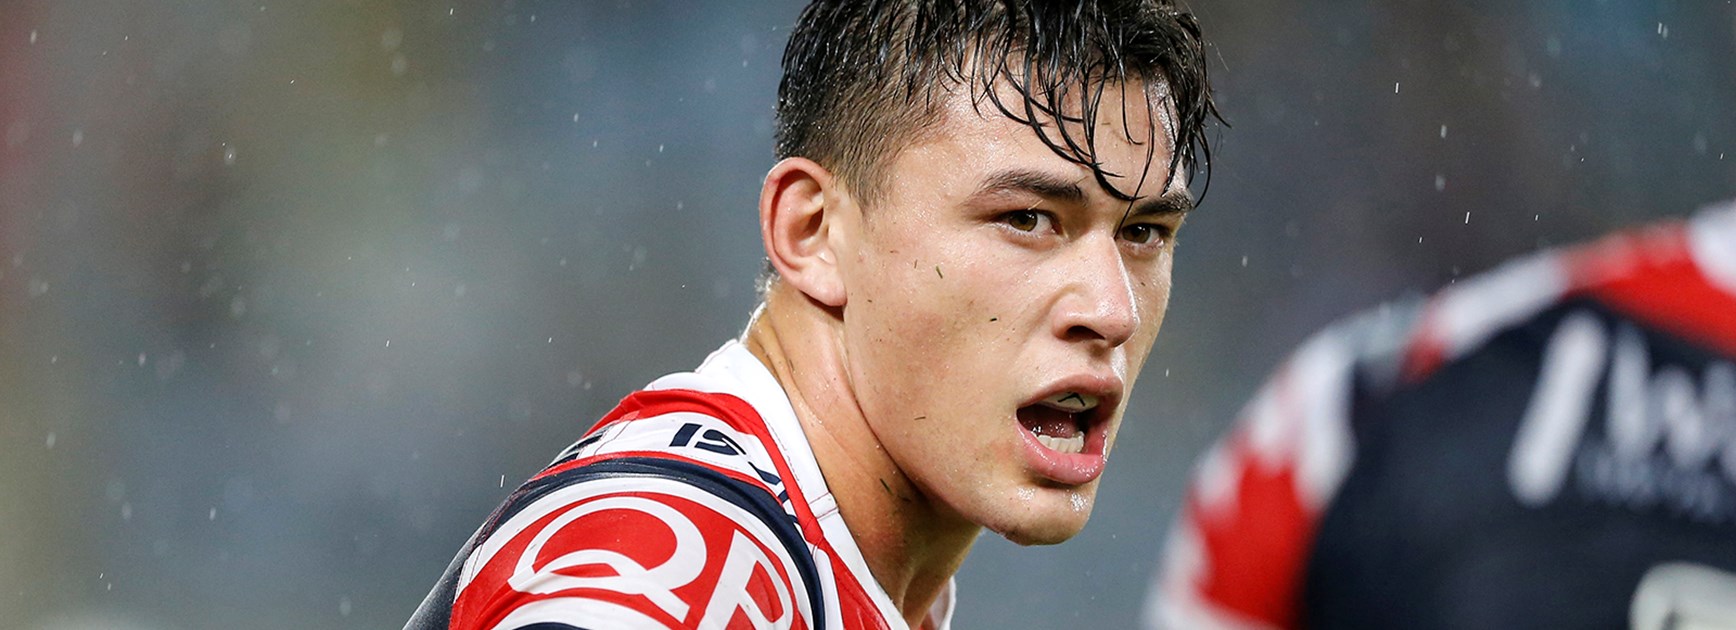 Joseph Manu will line up at centre for the Roosters against the Knights in Round 7.